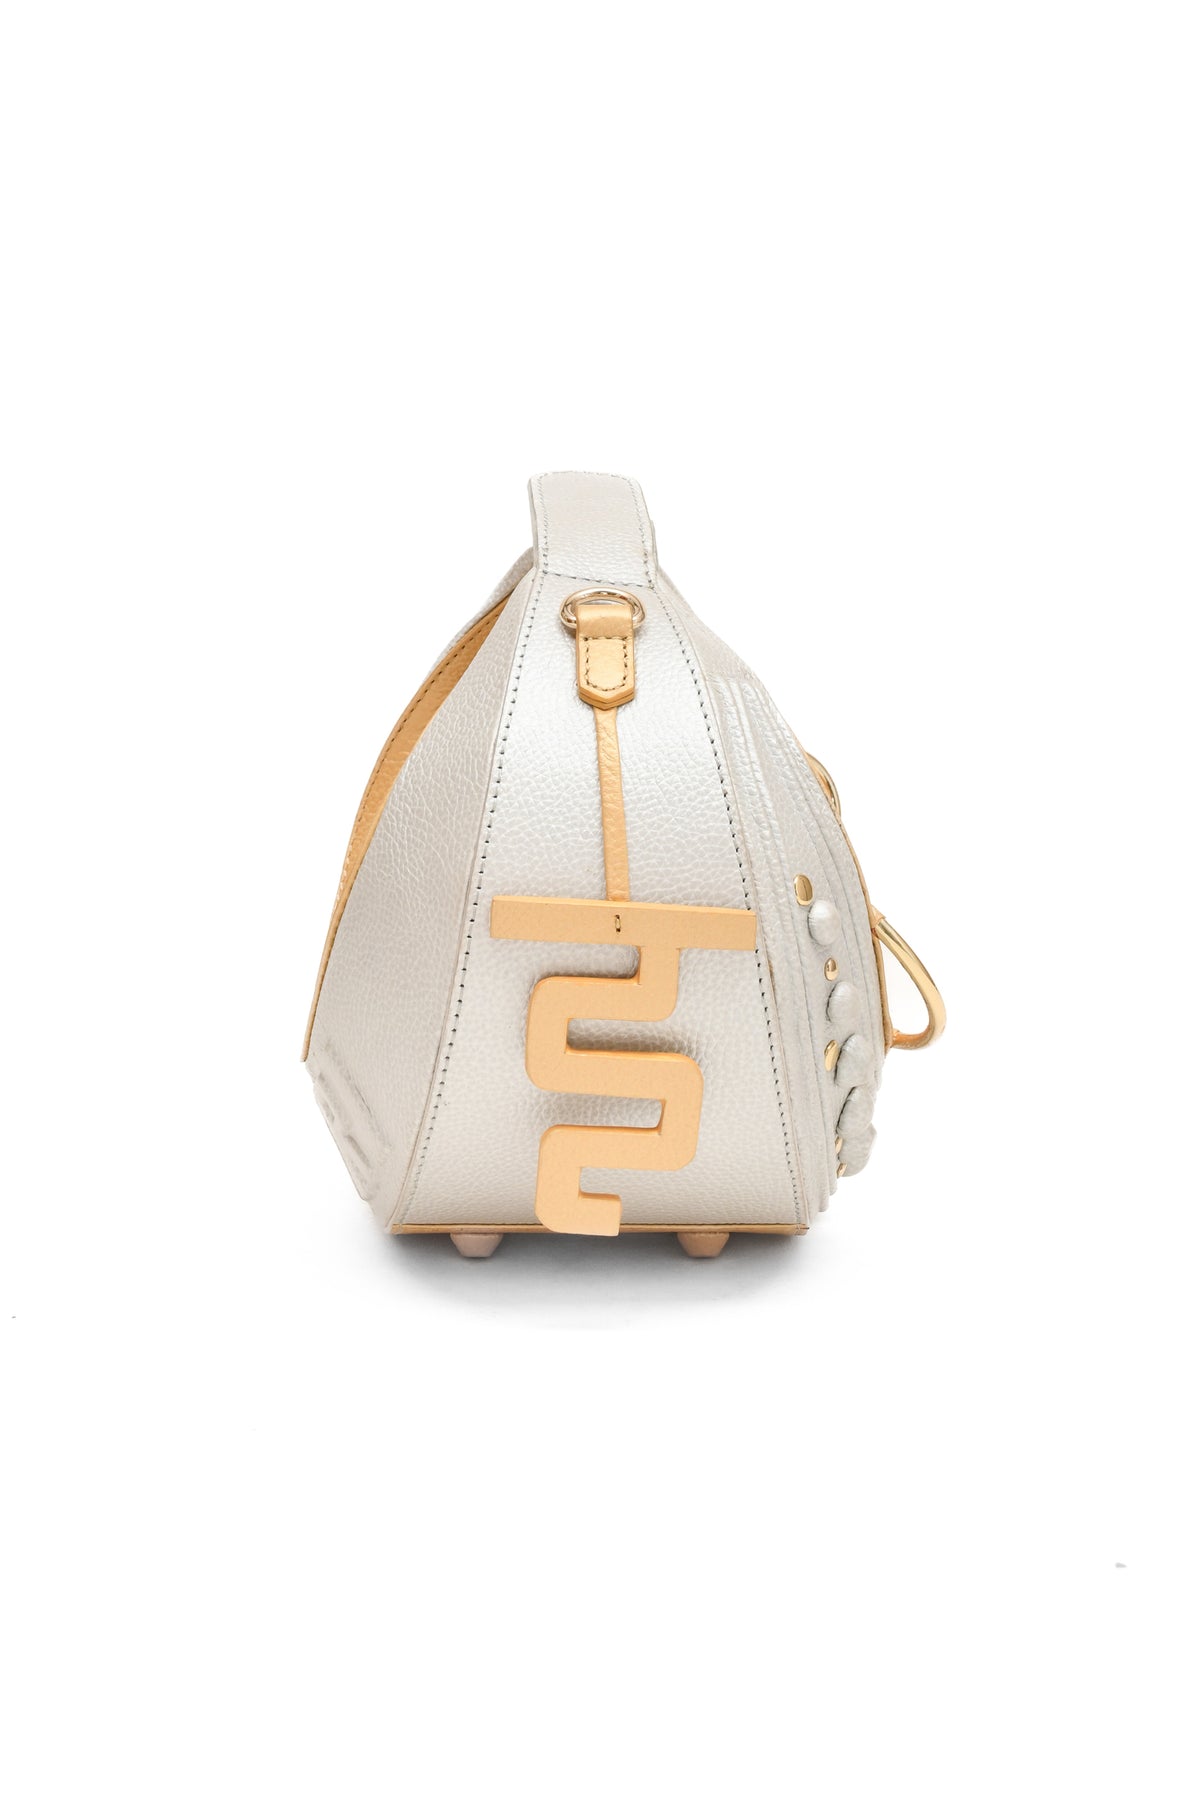 Gold And Silver Halo Bag